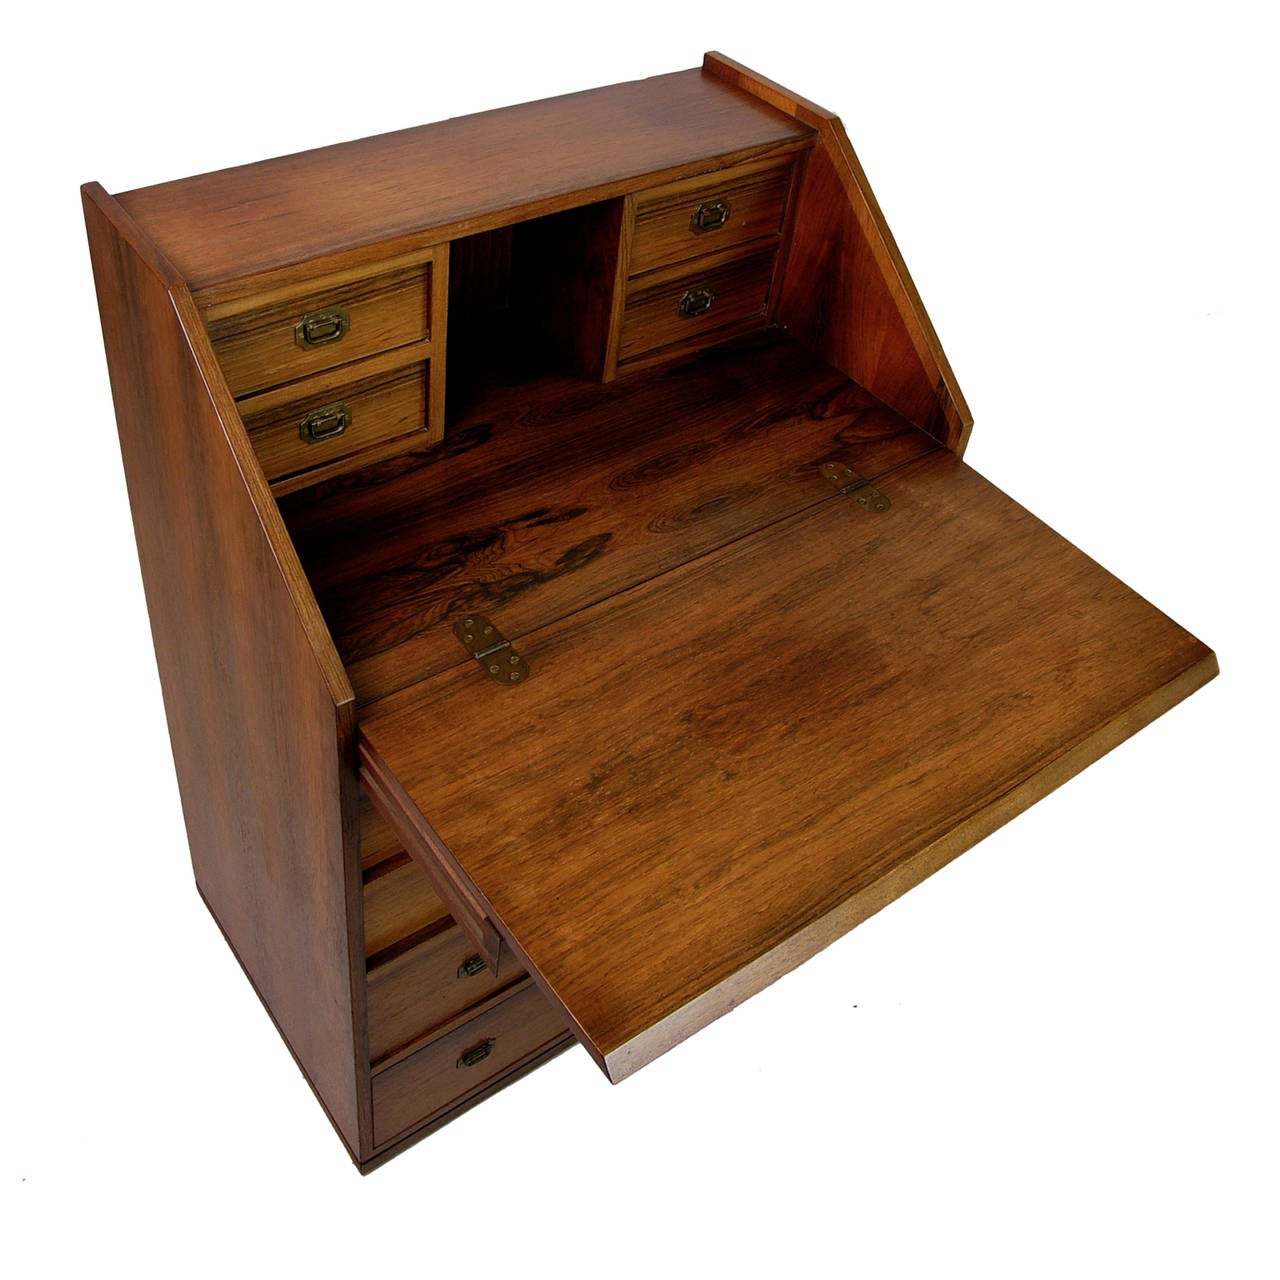 A very functional rosewood secretary desk in the Campaign style with brass pulls and mahogany drawer interiors. 